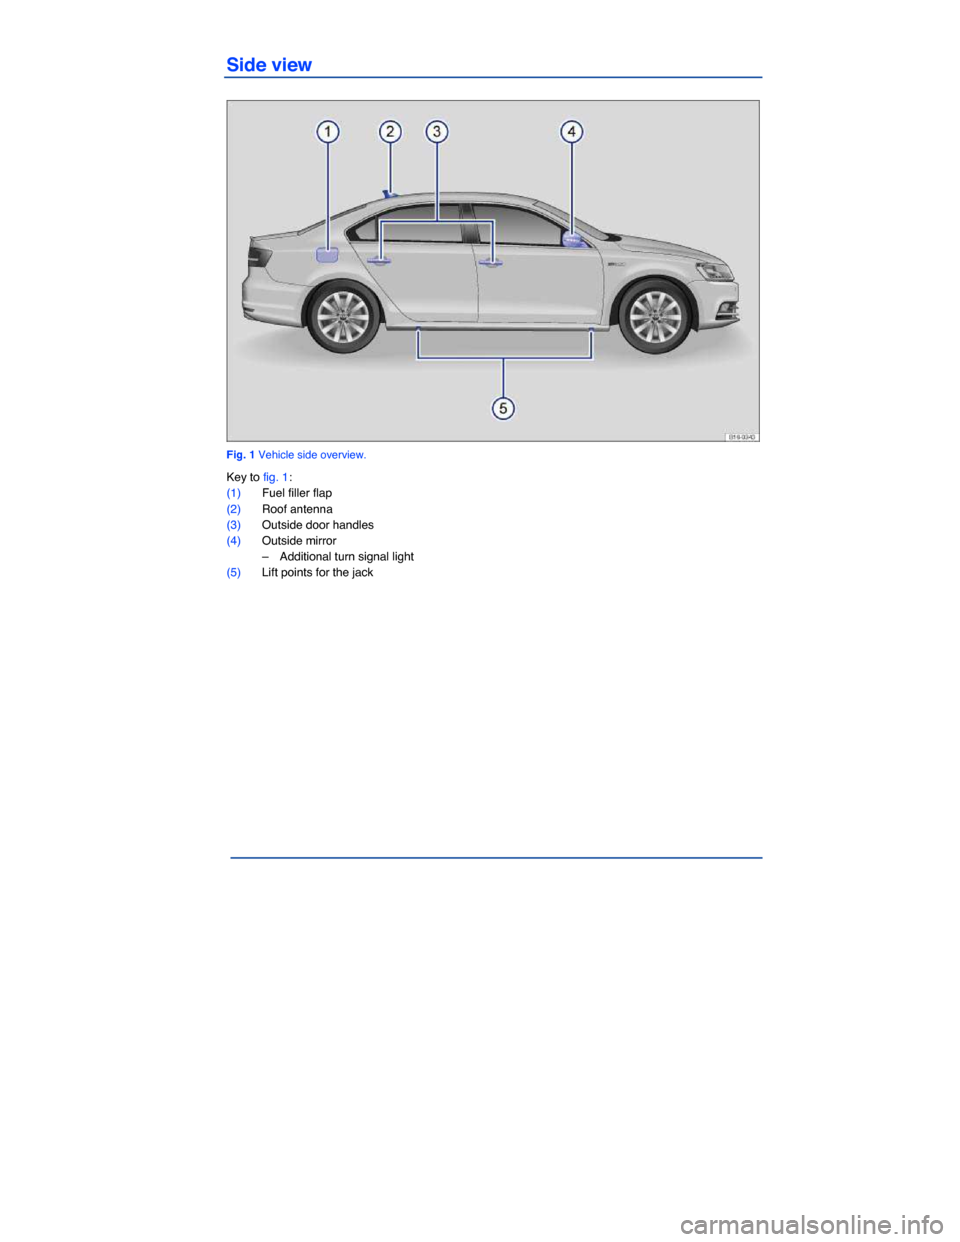 VOLKSWAGEN JETTA HYBRID 2015 1B / 6.G Owners Manual  
Side view 
 
Fig. 1 Vehicle side overview. 
Key to fig. 1: 
(1) Fuel filler flap  
(2) Roof antenna  
(3) Outside door handles  
(4) Outside mirror  
–  Additional turn signal light  
(5) Lift poi